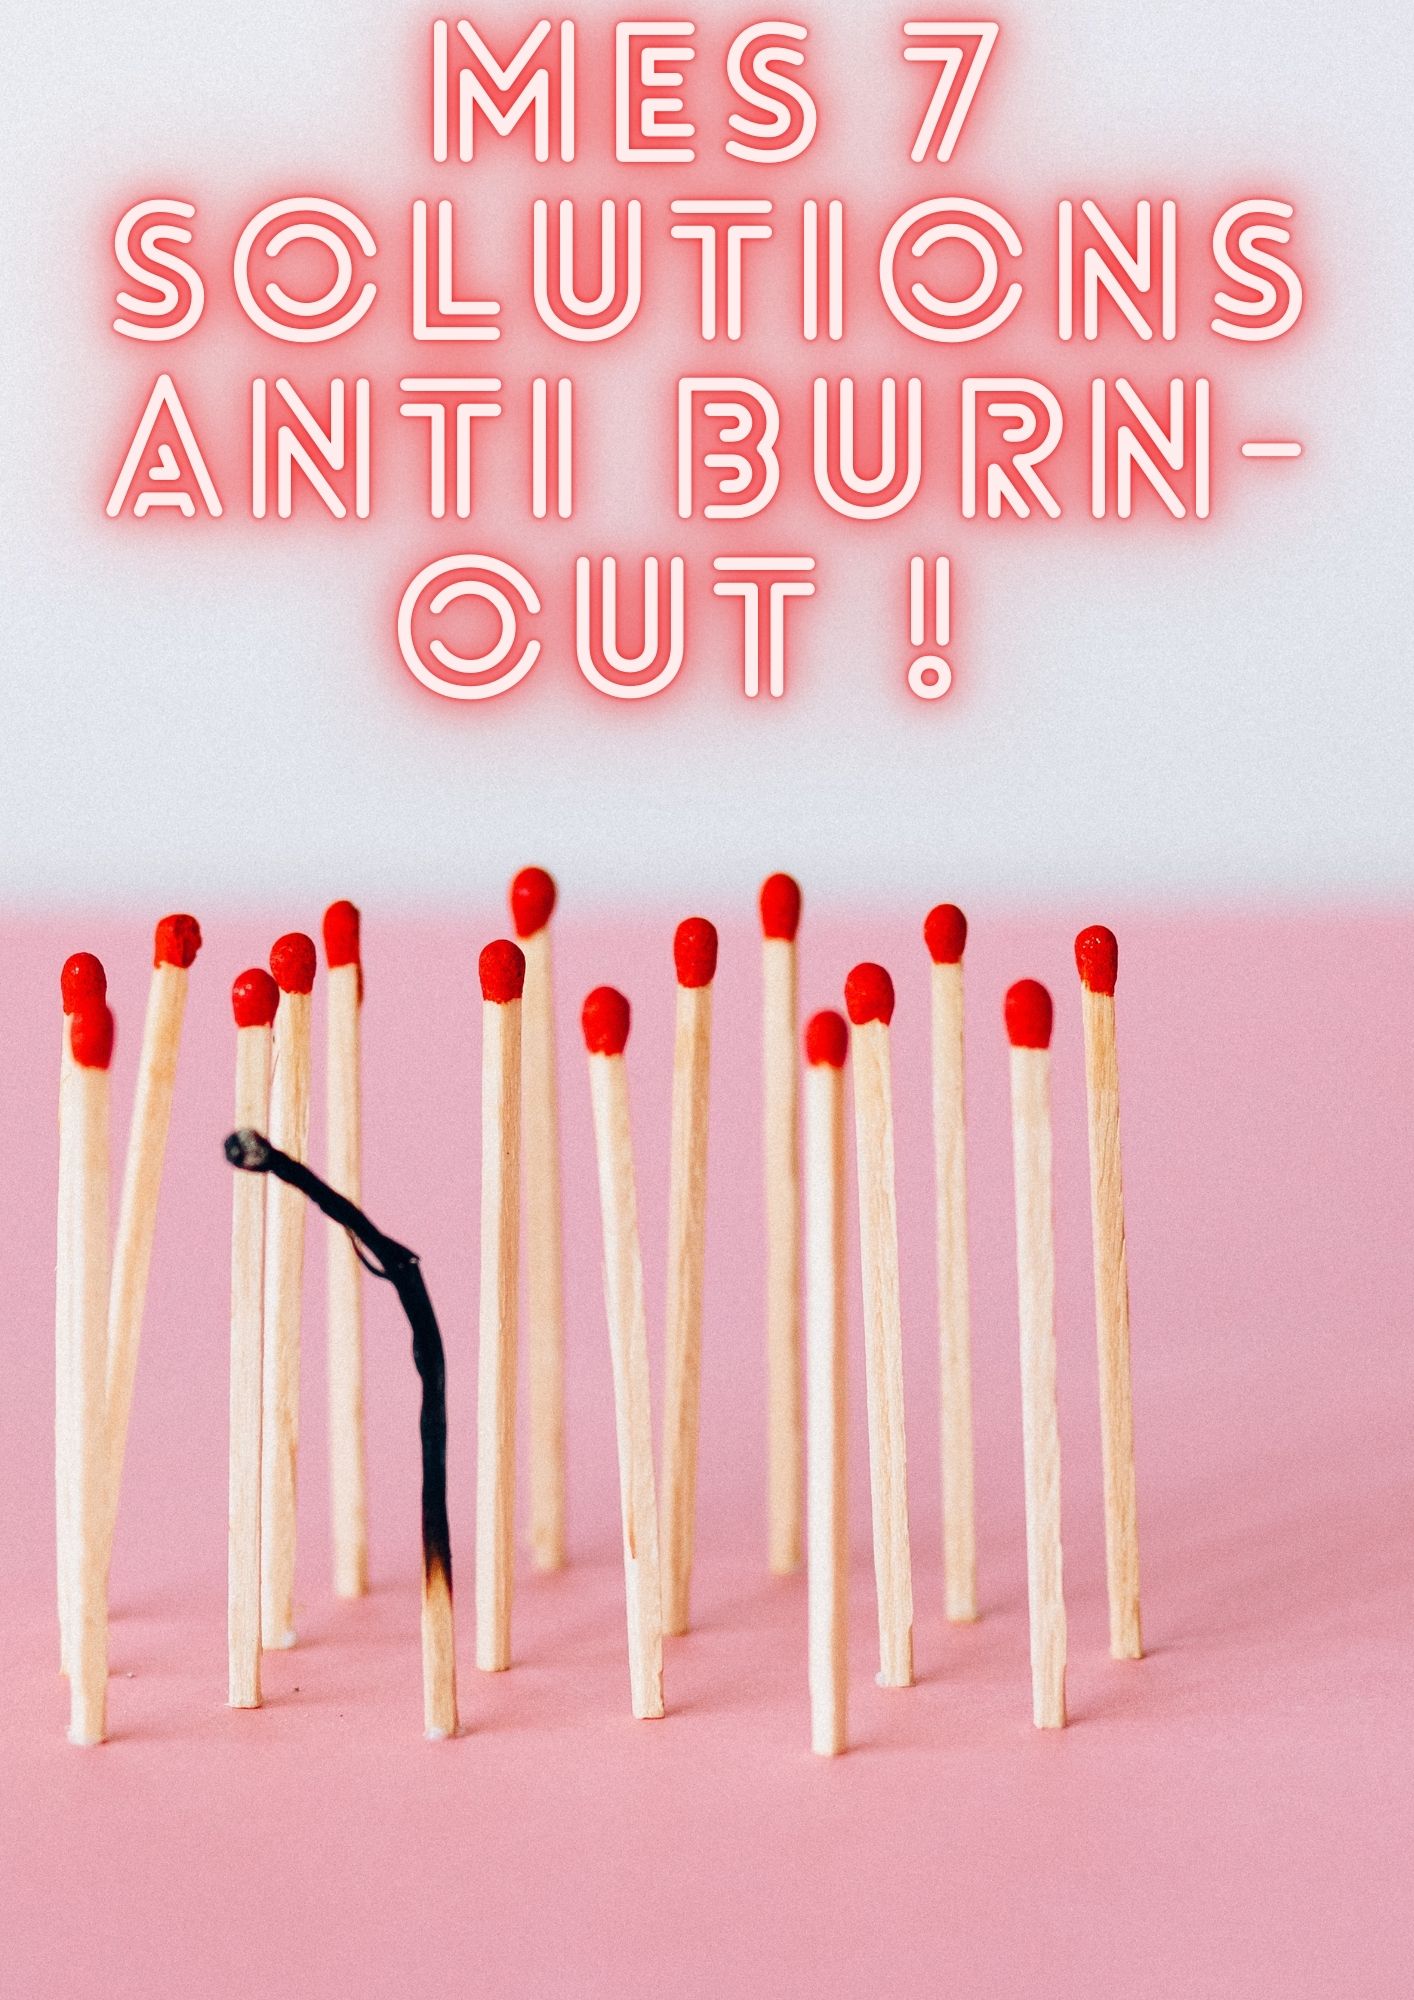 Mes 7 solutions anti-burn-out !